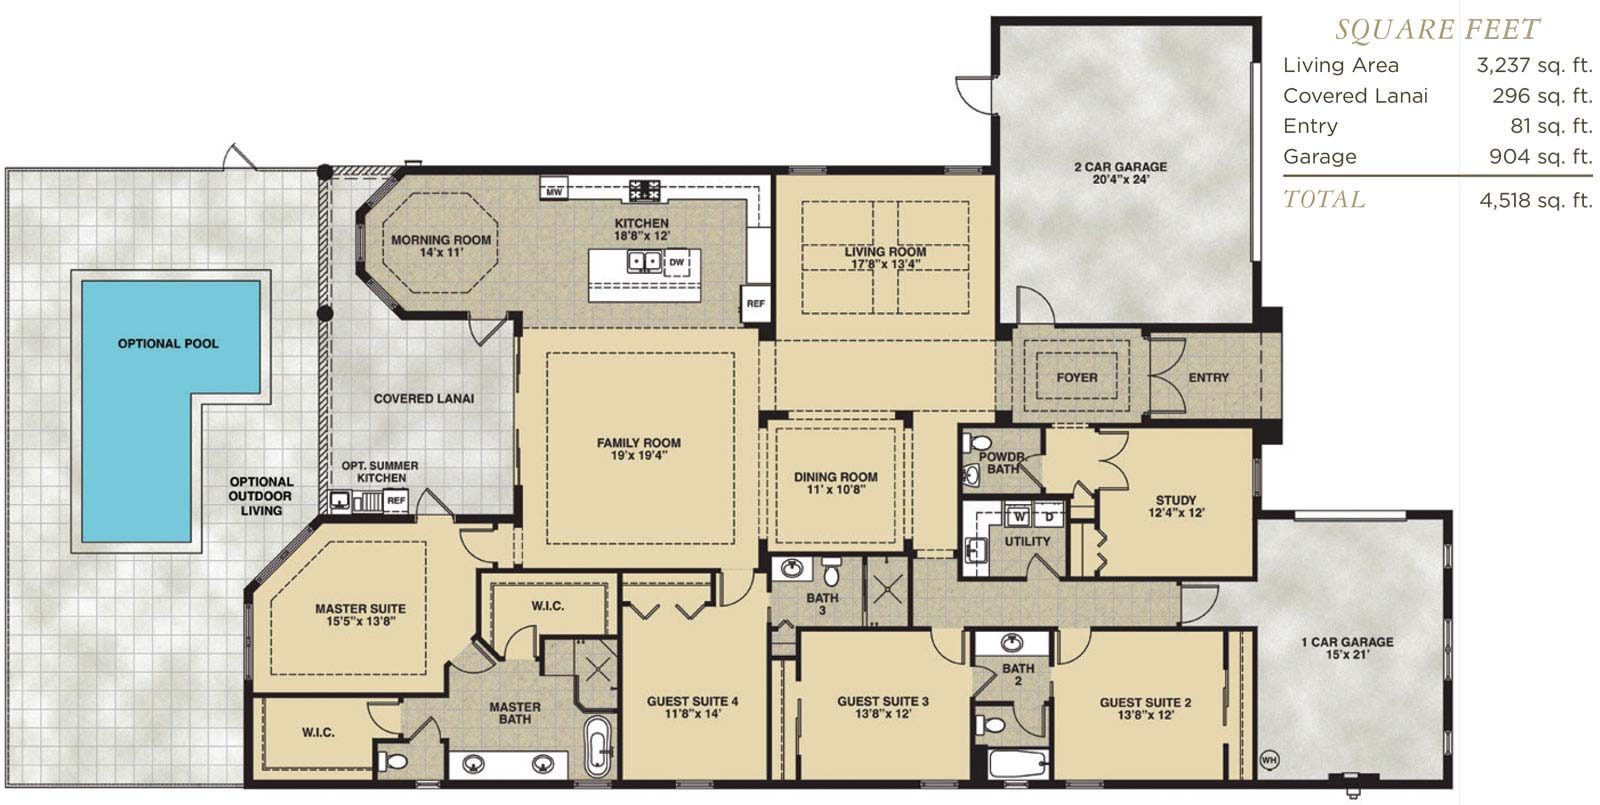 Antilles Floor Plan in Hidden Harbor Estates, Fort Myers, Stock Construction, Four Bedroom, Three and One Half Bath, Living Room, Family Room, Dining Room, Study, Covered Lanai, 2-Car Garage and 1-Car Garage